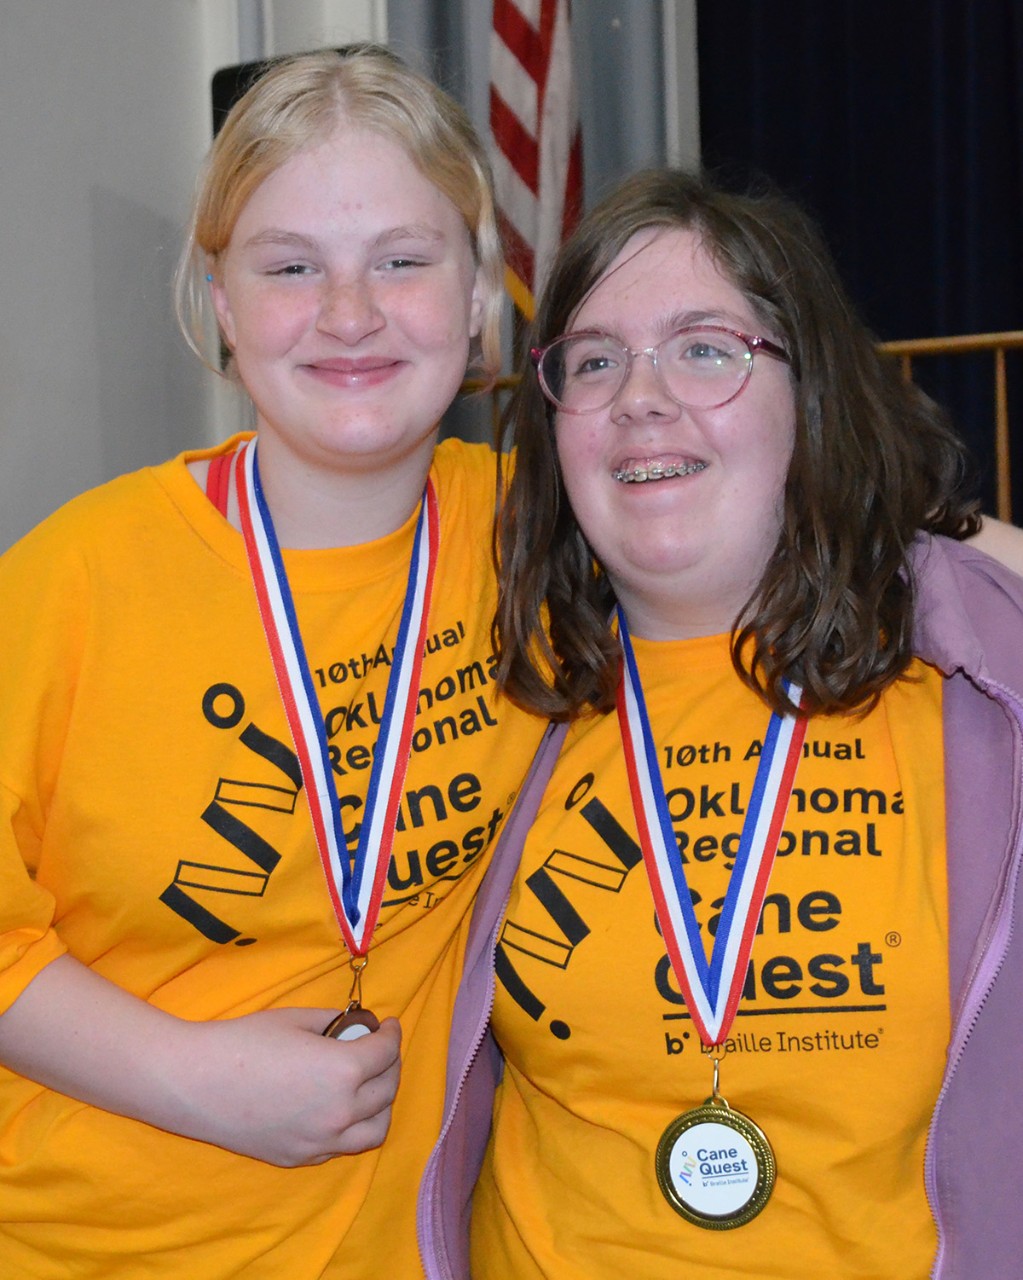 Two smiling young women wearing medals.